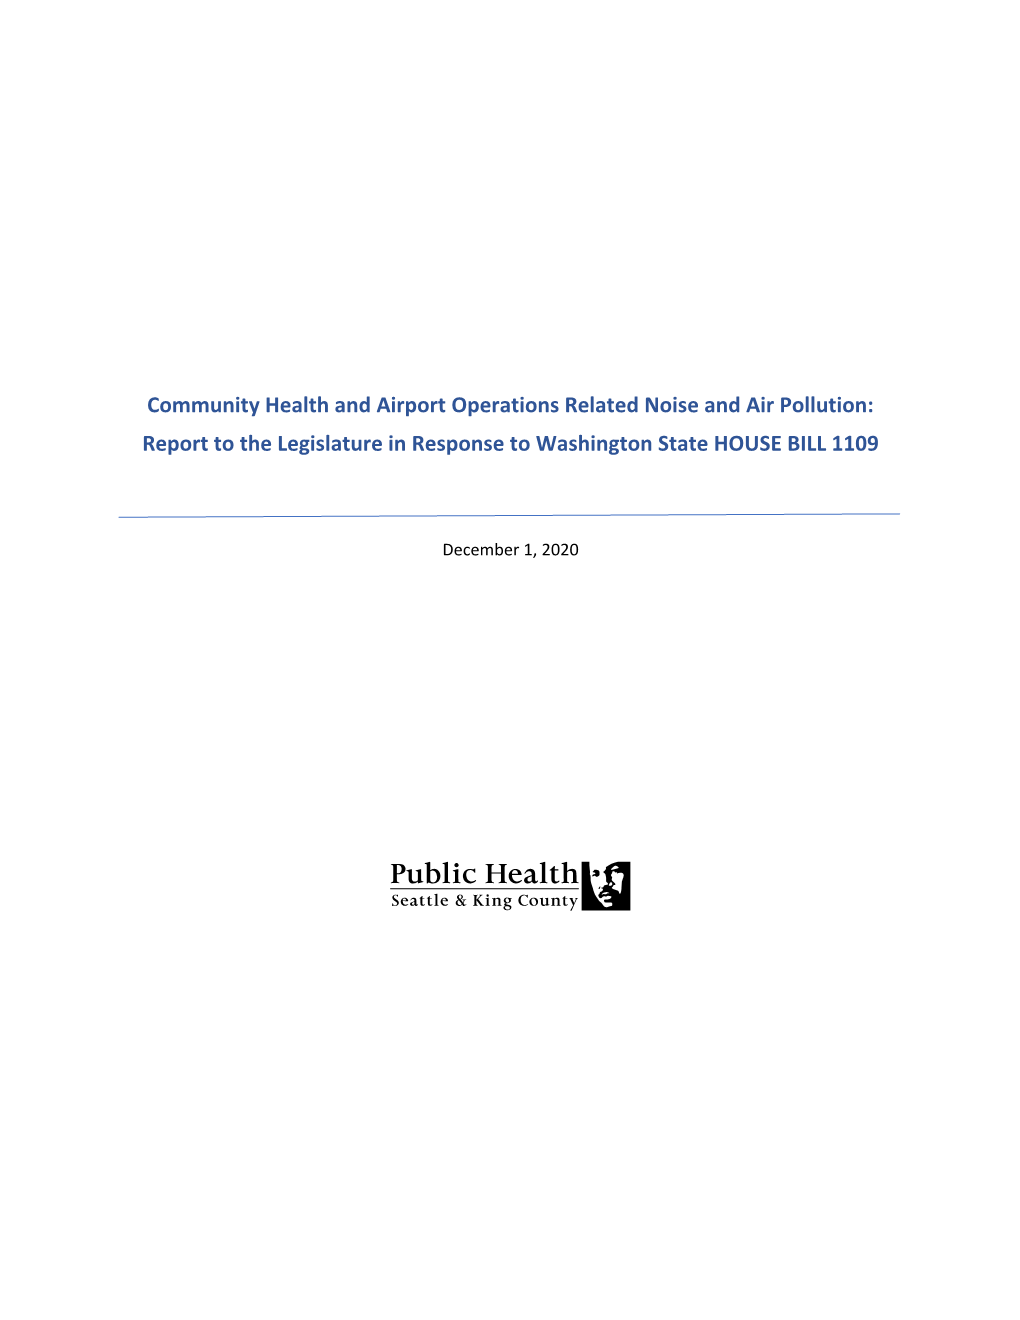 Community Health and Airport Operations Related Noise and Air Pollution: Report to the Legislature in Response to Washington State HOUSE BILL 1109